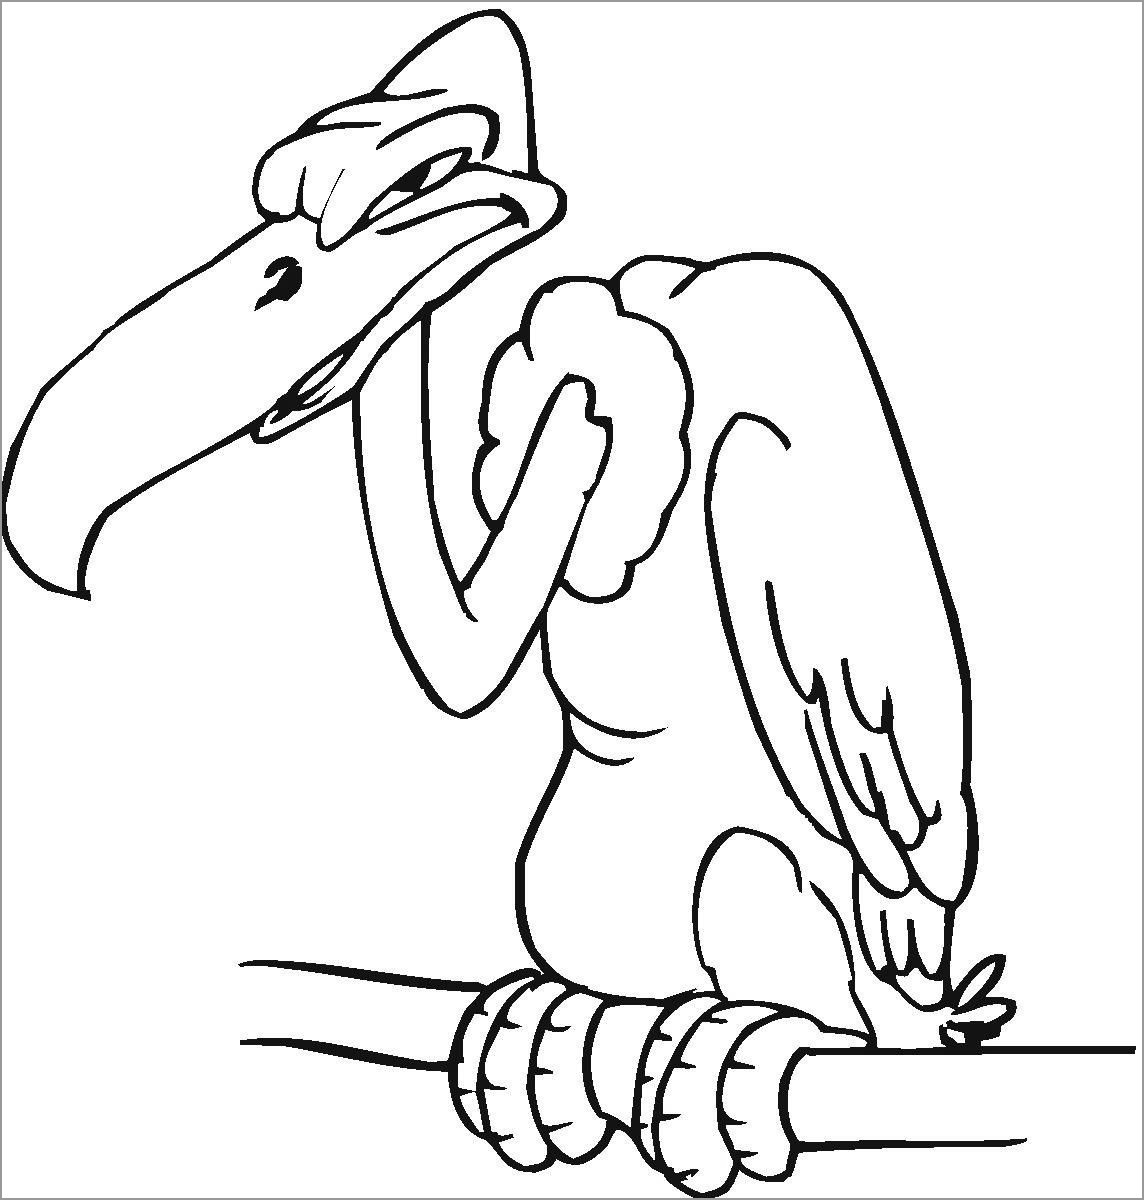 Vulture Coloring Page Free Download